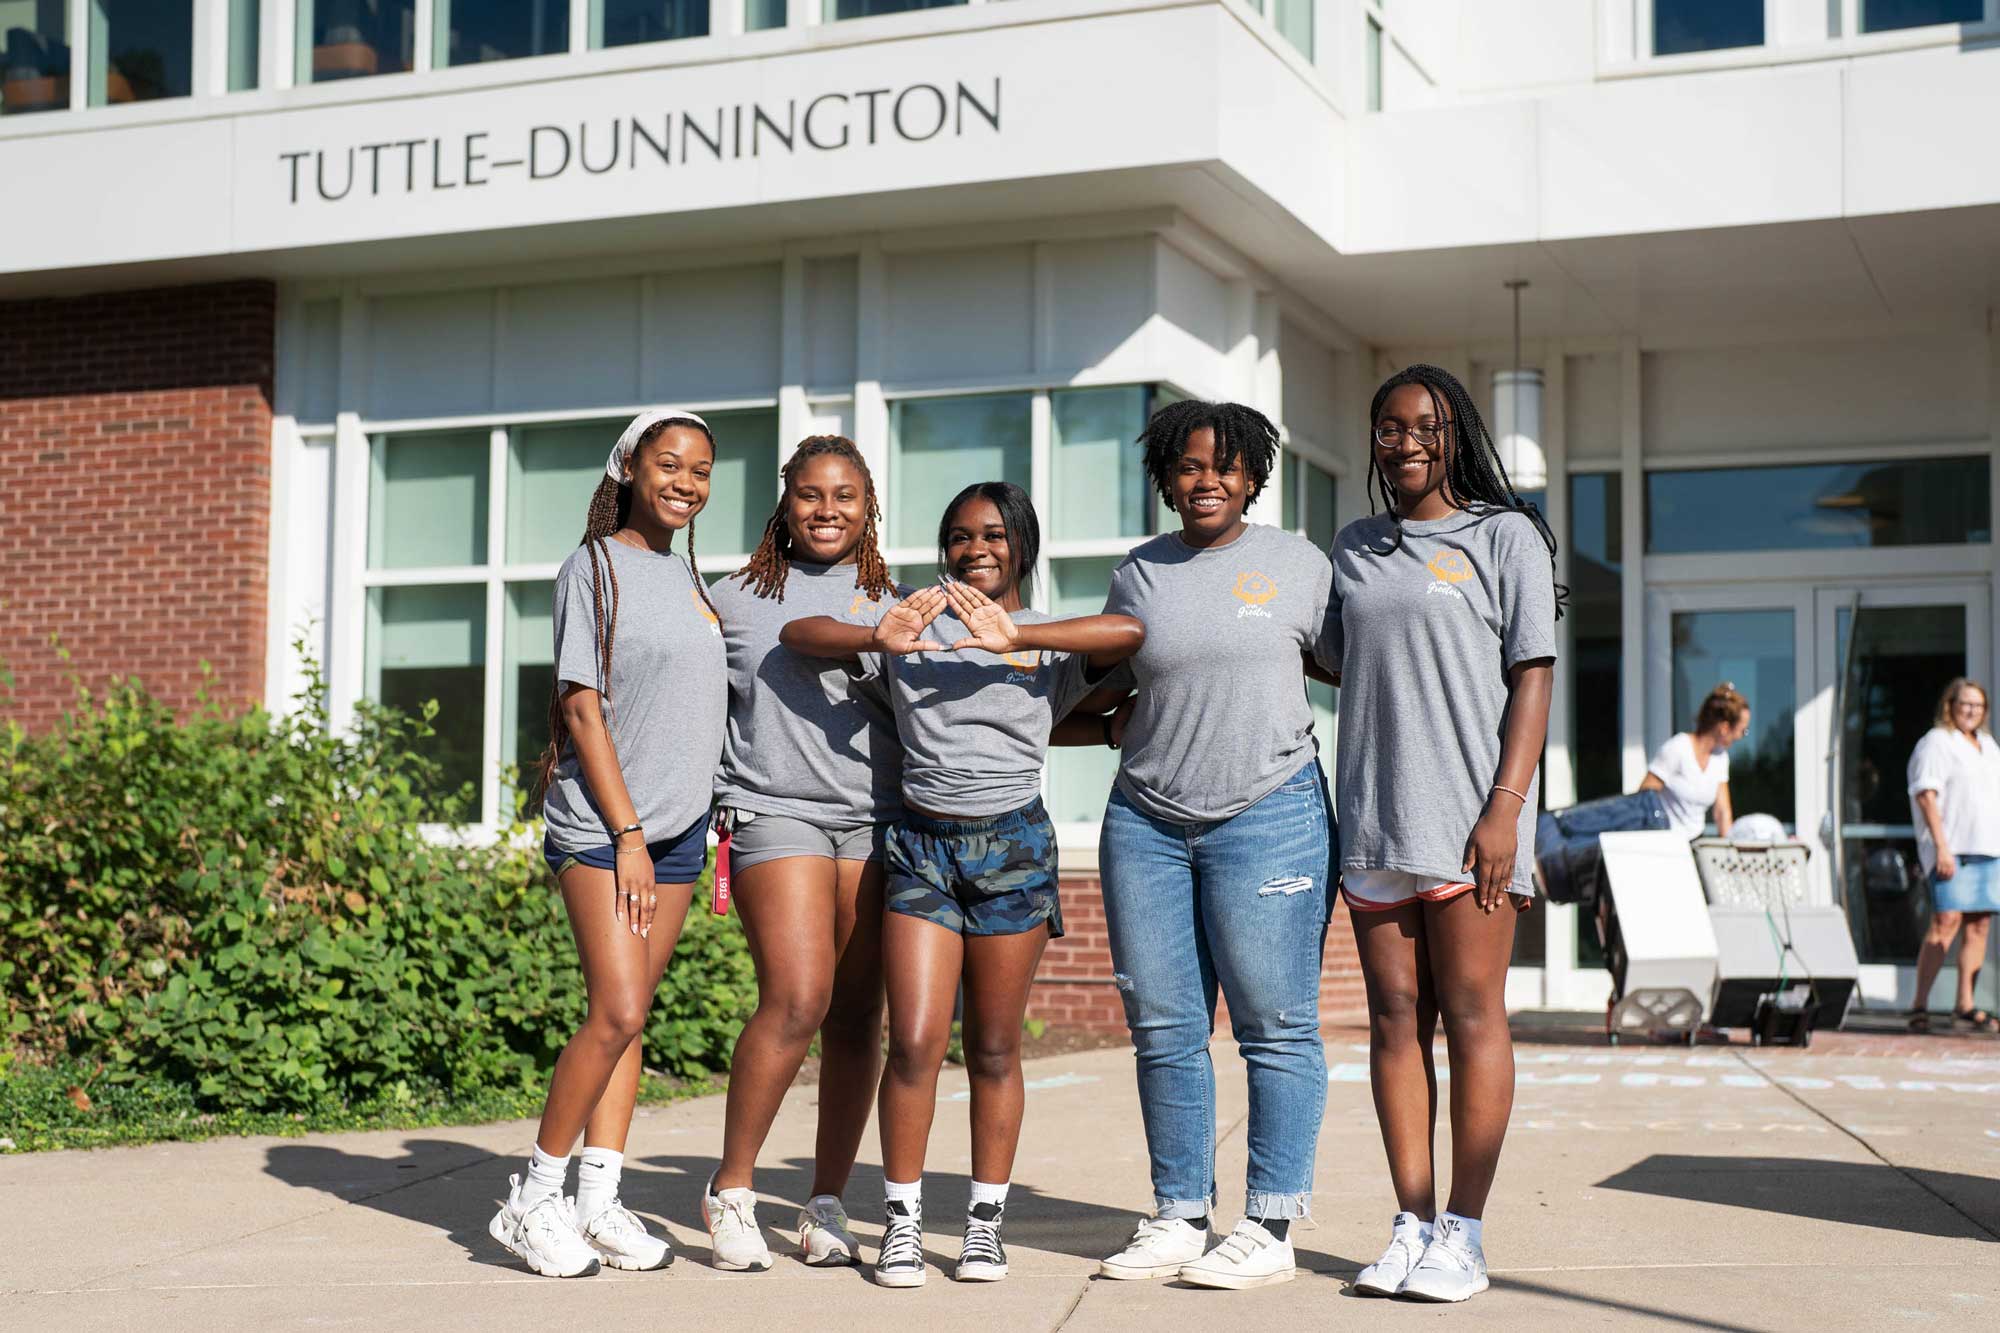 Five students wearing matching gray Greeter shirts pose in front of Tuttle-Dunnington dormitory.